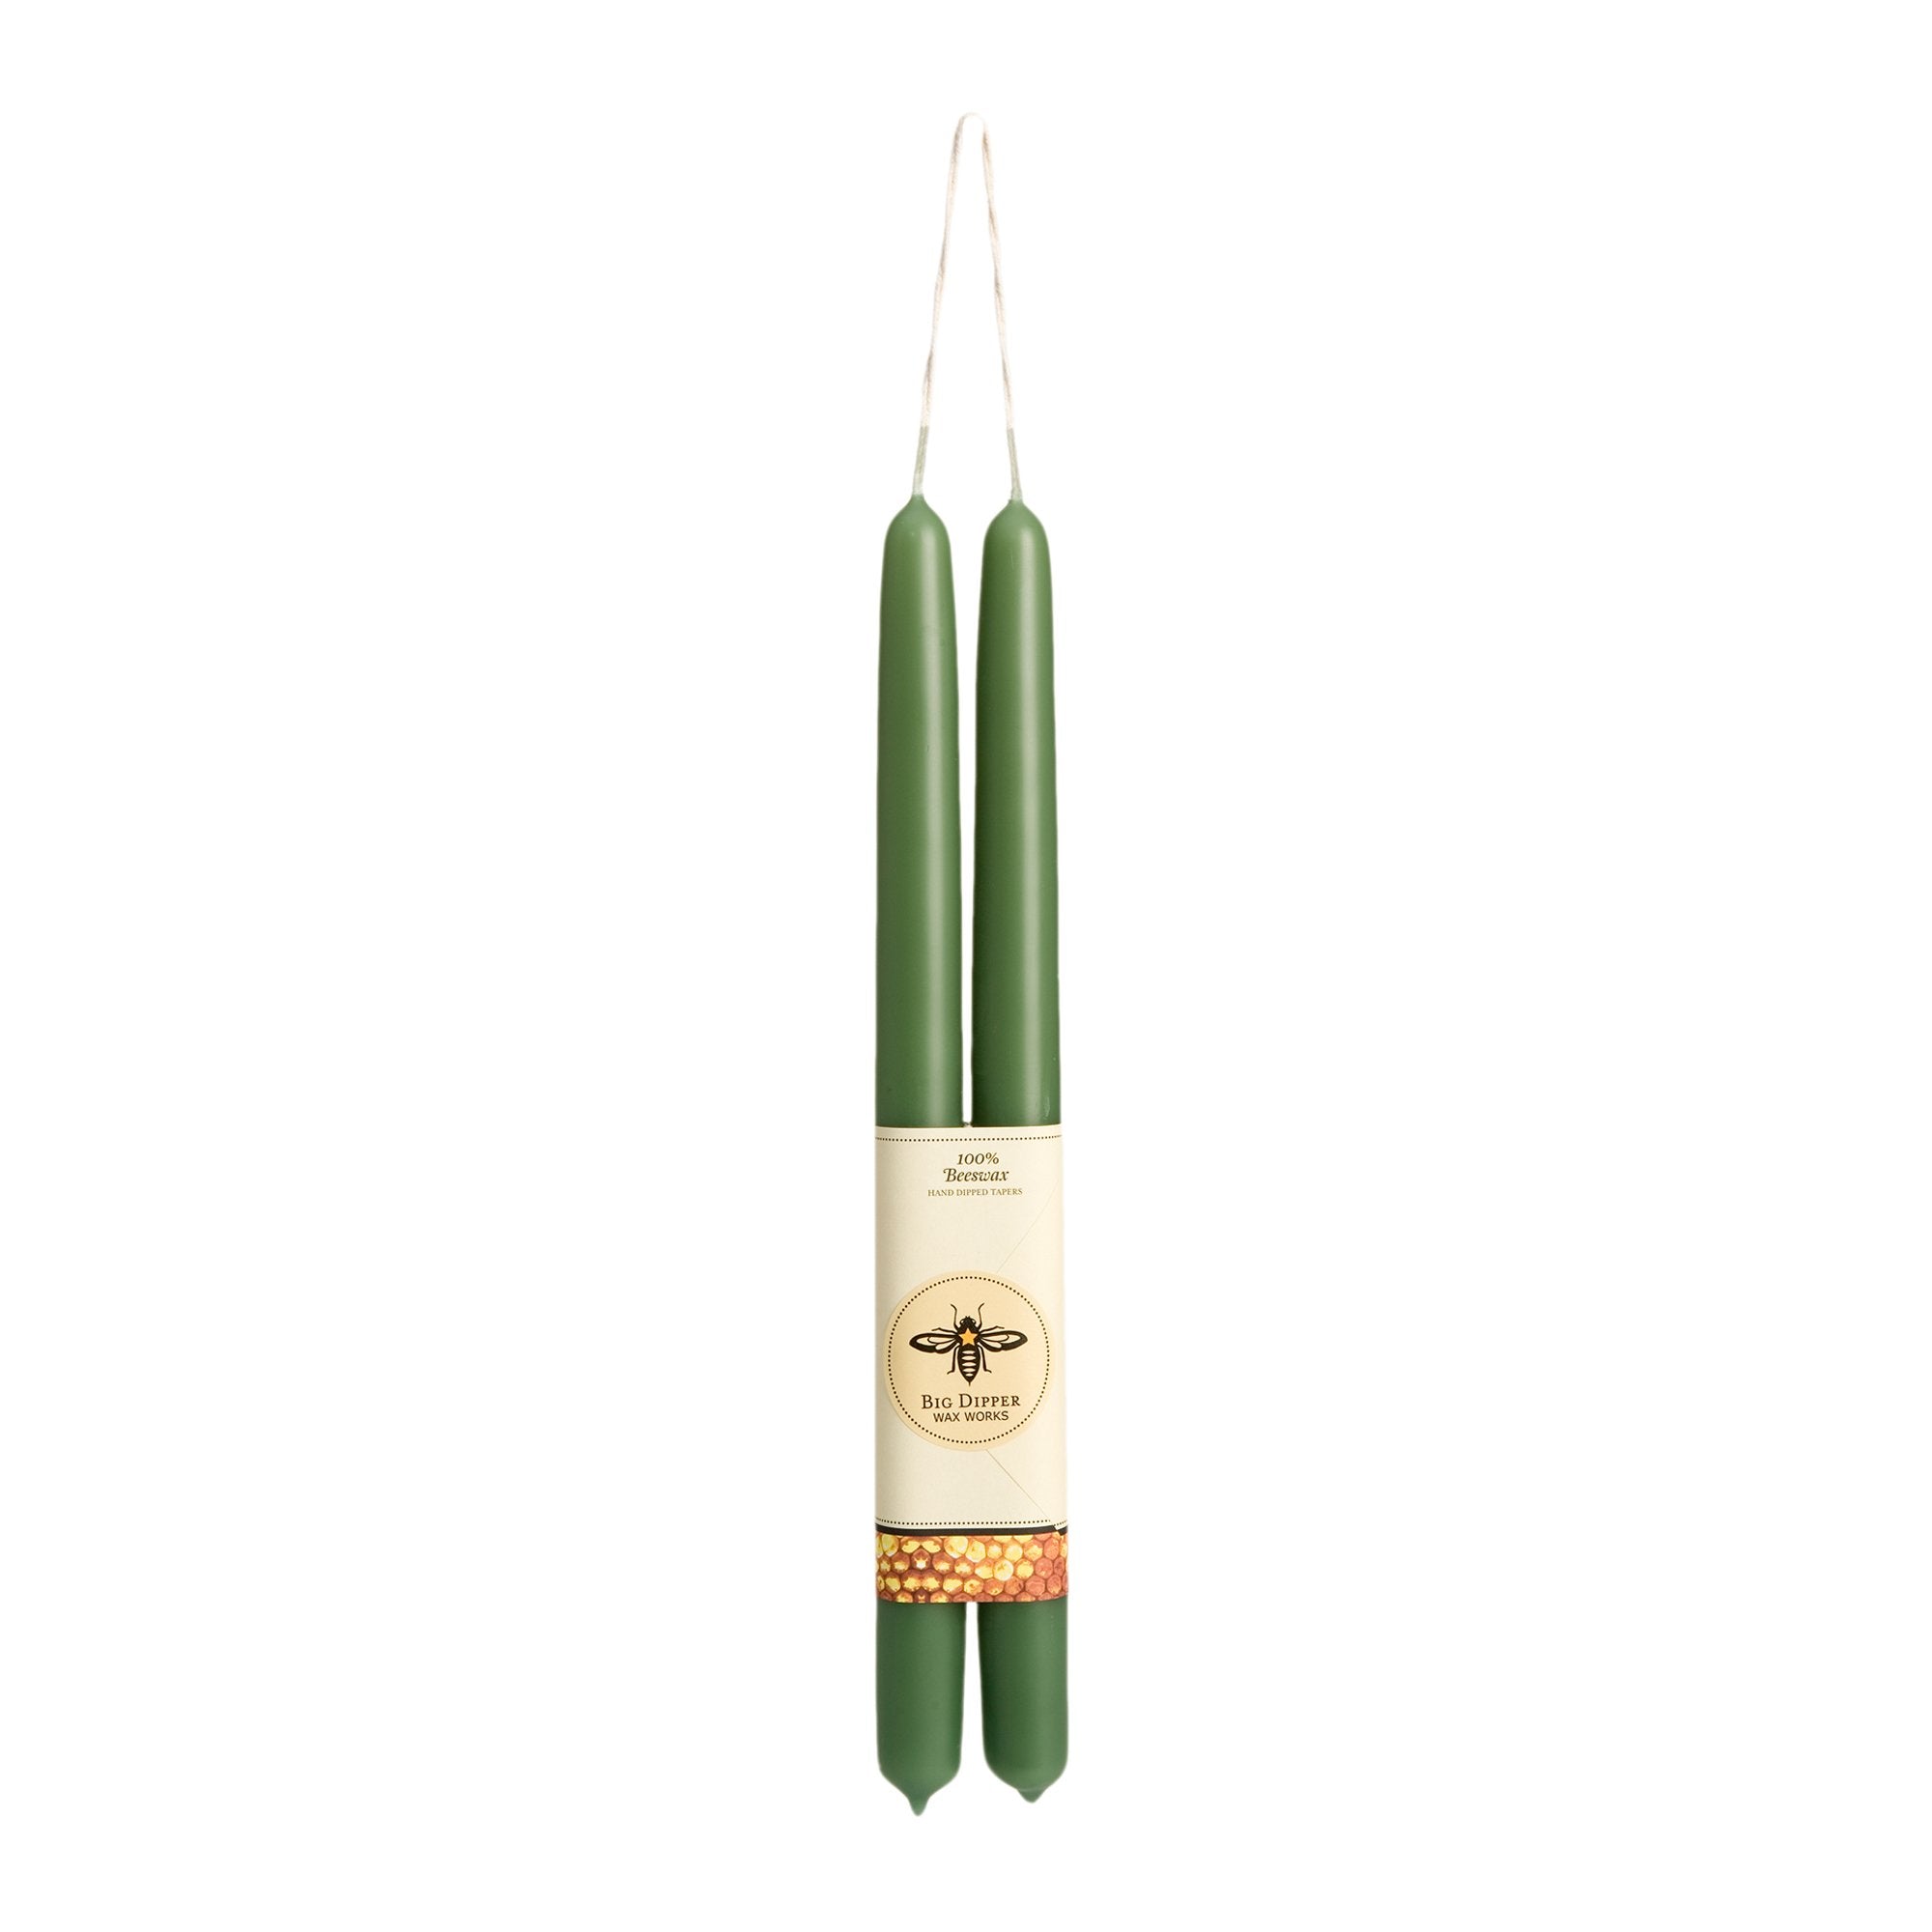 pair of moss colored long taper candles, hung from the wick, wrapped in big dipper logo